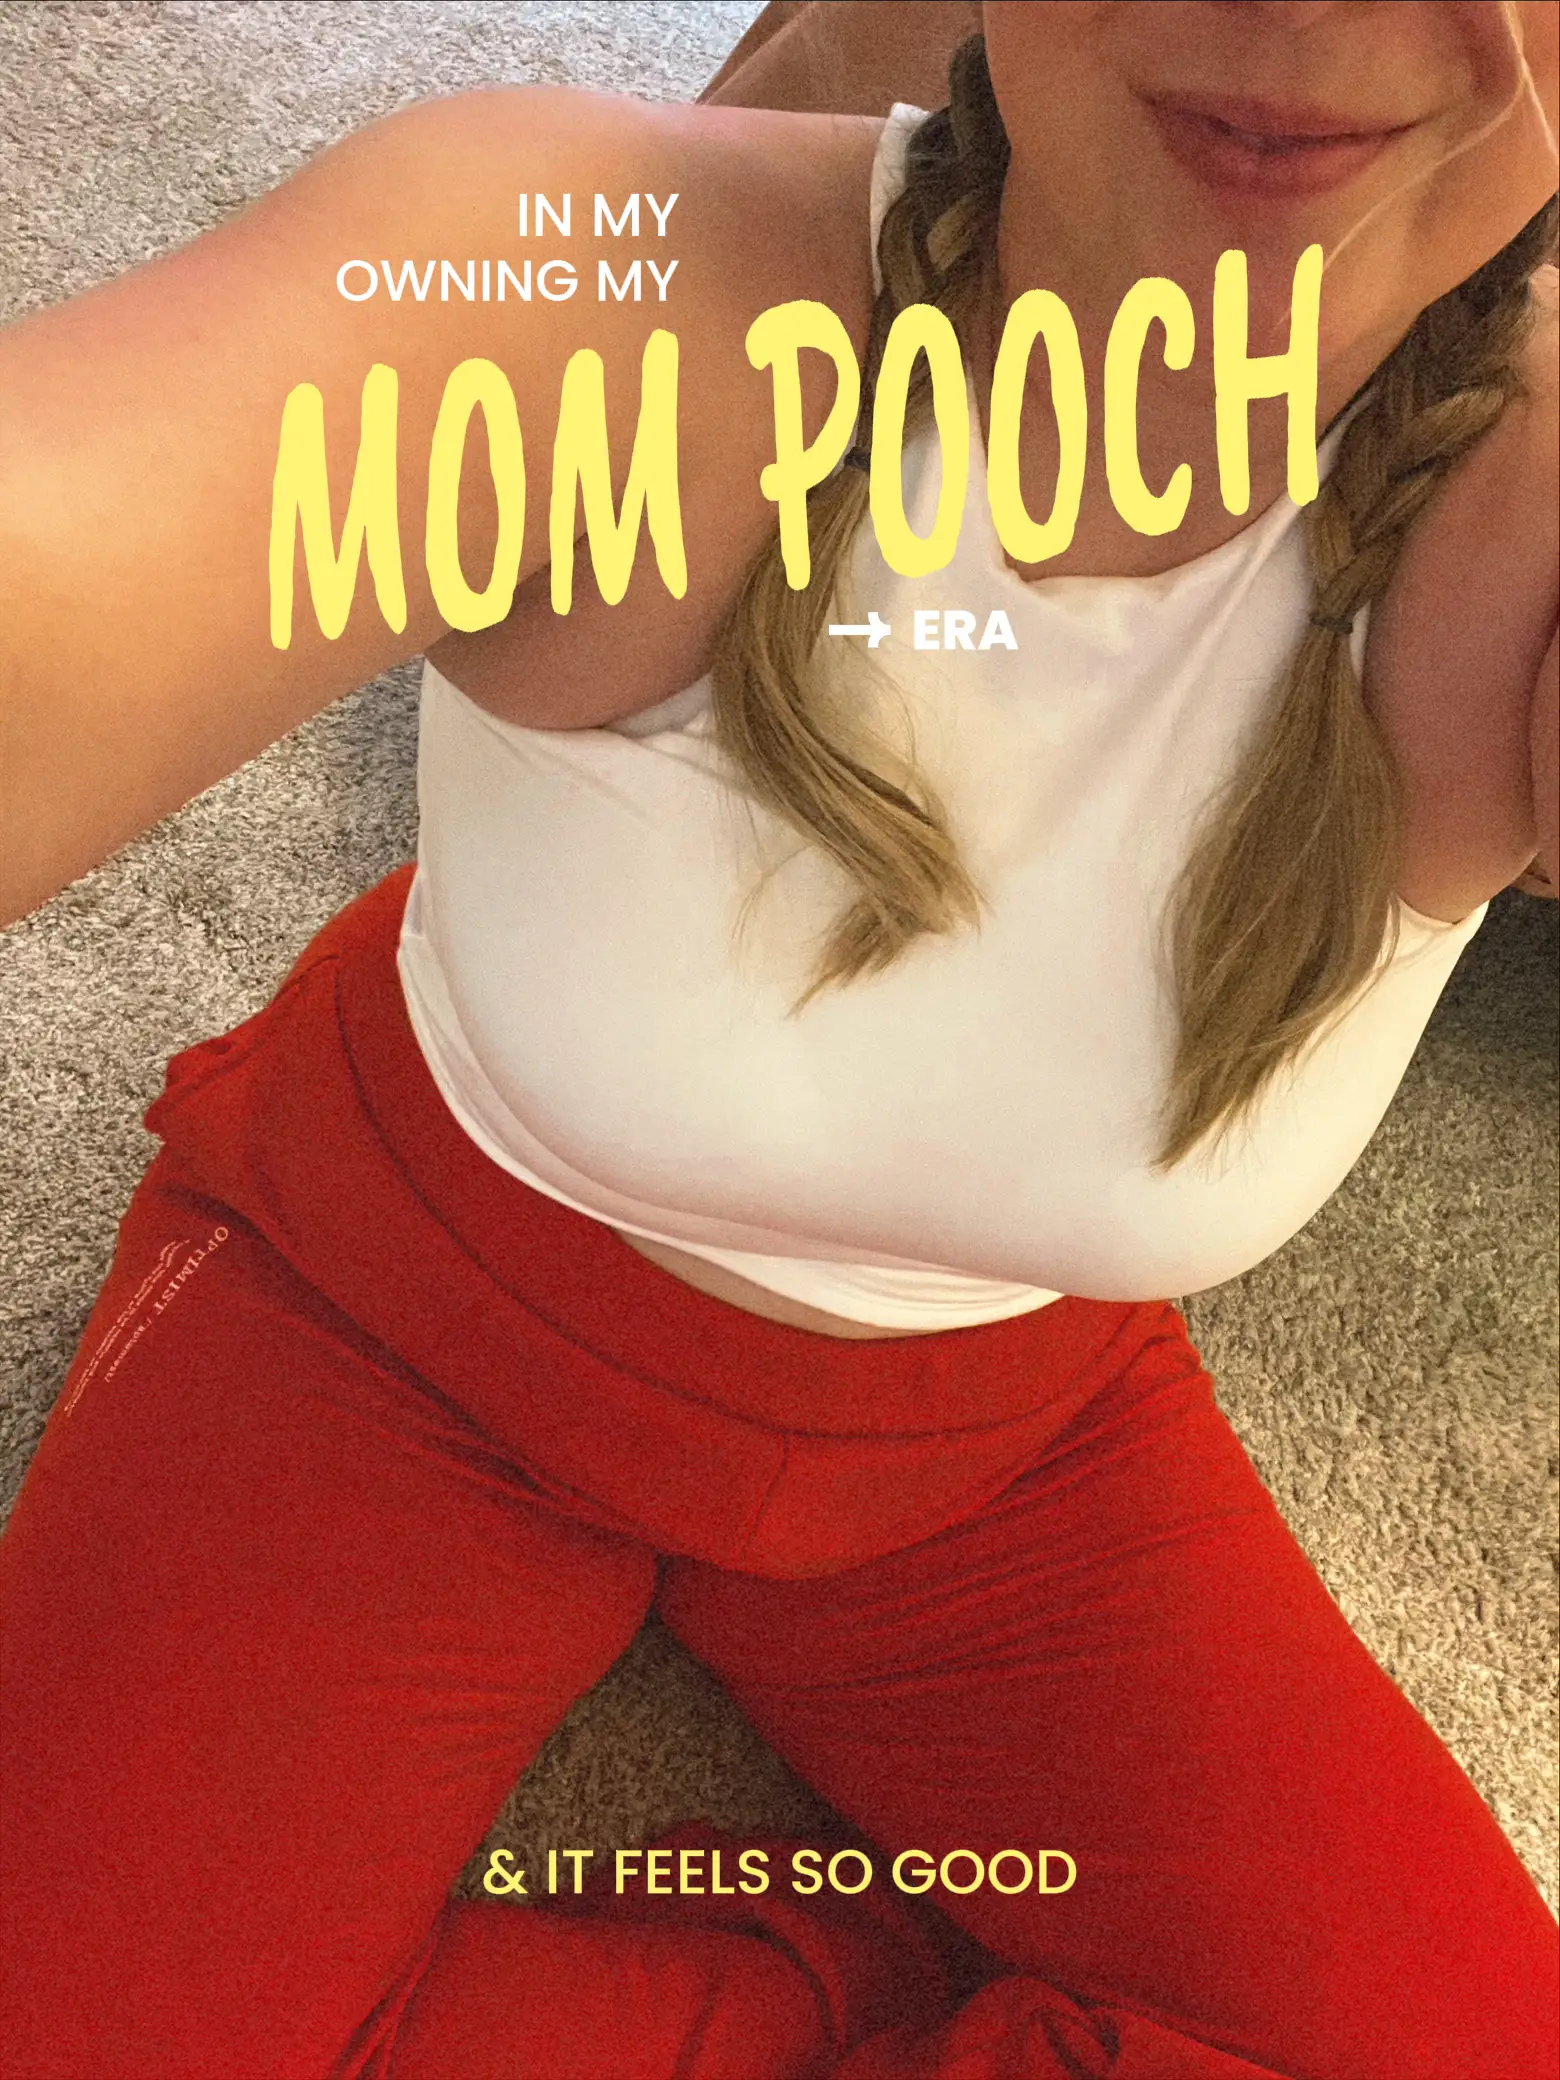 Getting Rid of the Mom Pooch